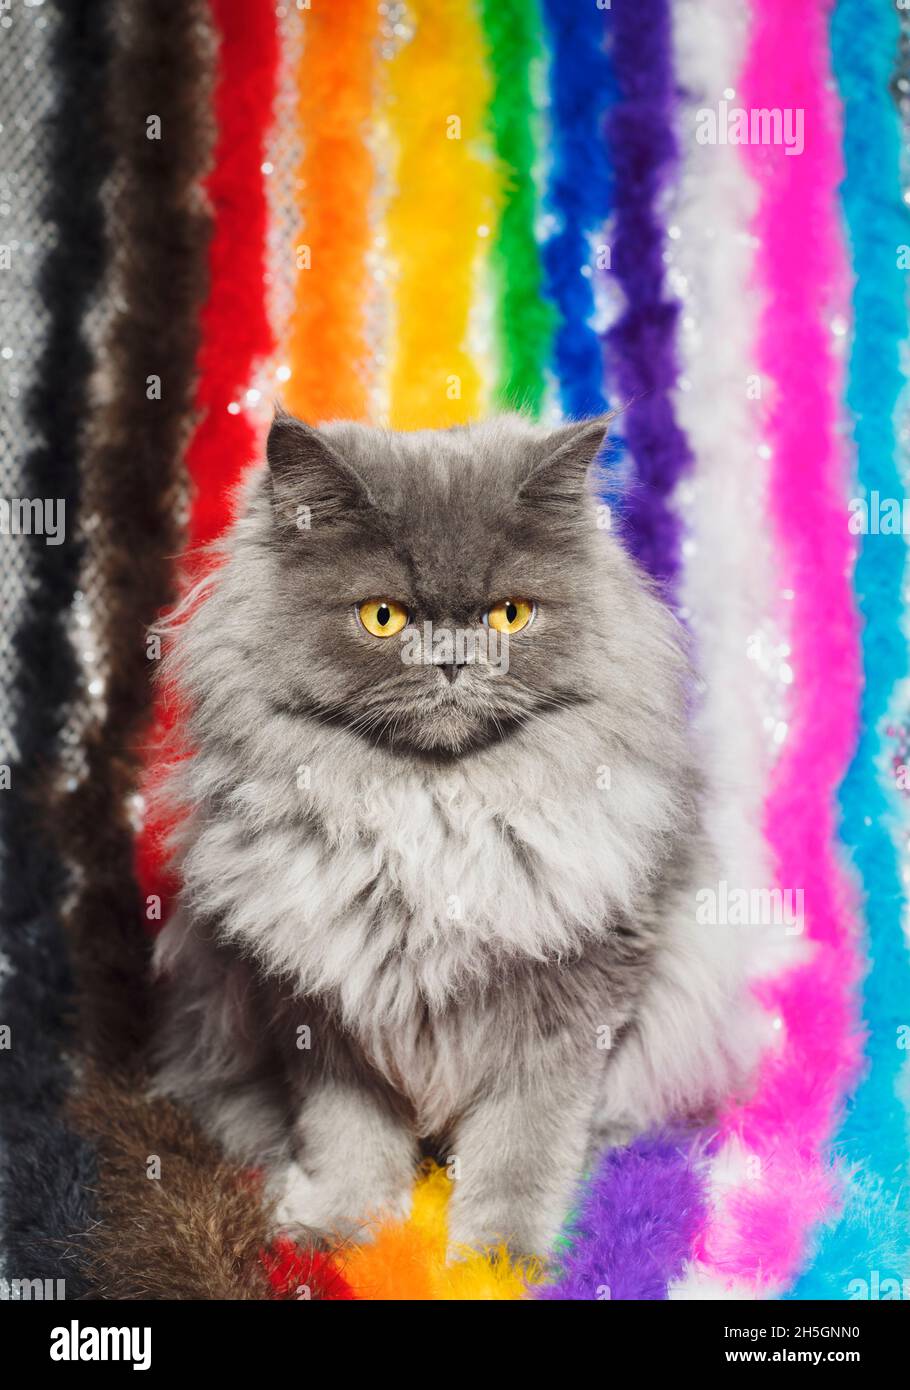 Sweet fluffy grey ragamuffin cat sitting with a rainbow of feather boas representing the inclusive pride flag. Stock Photo